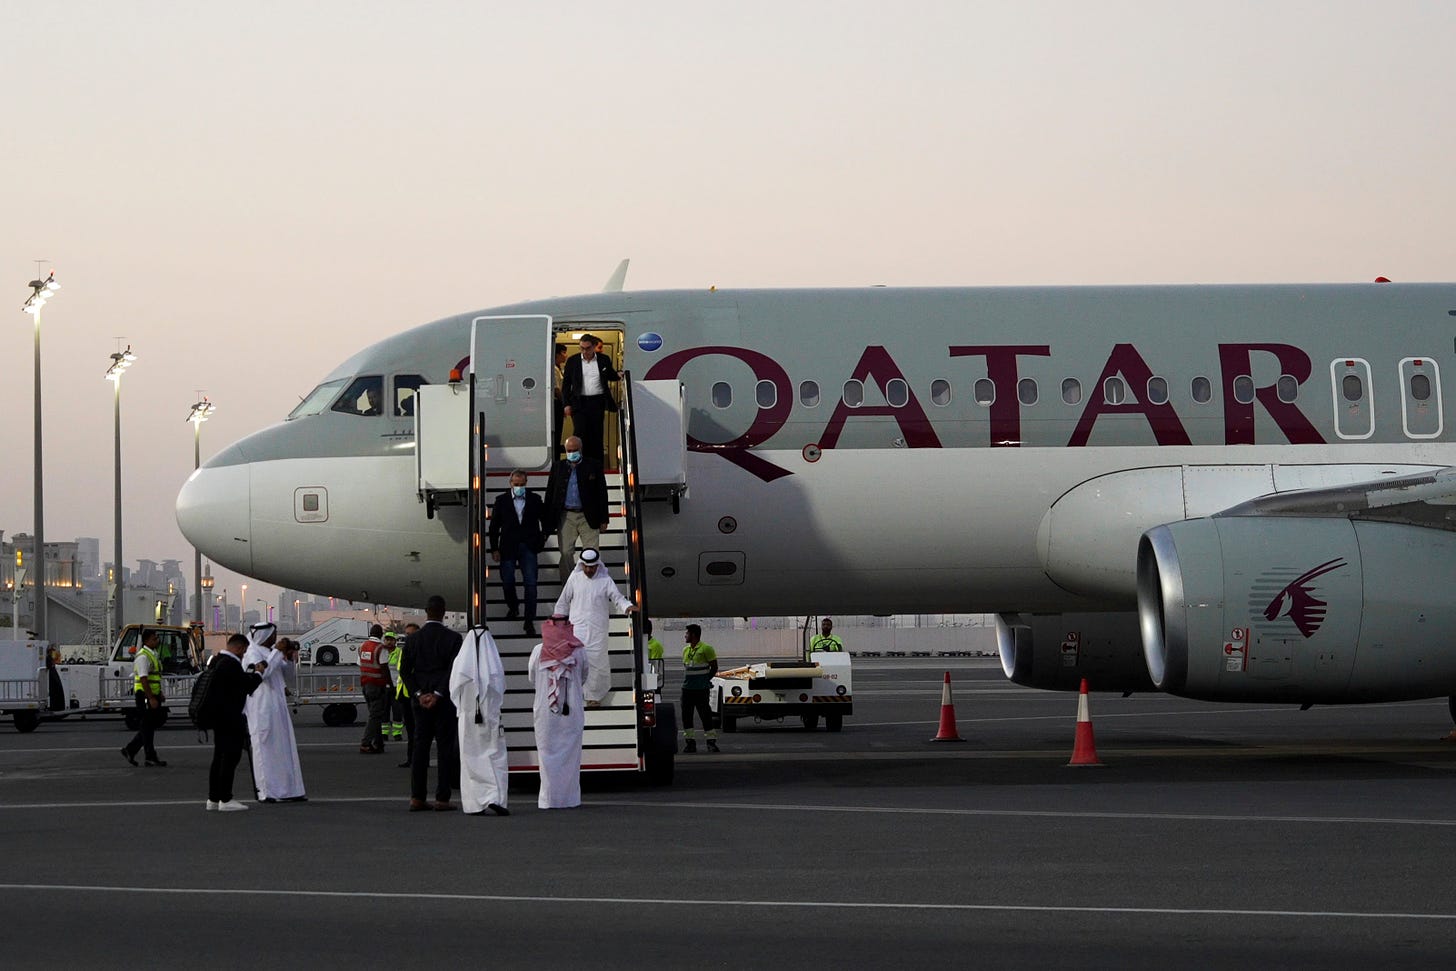 Emad Sharghi, Morad Tahbaz and Siamak Namazi, former prisoners in Iran, walk out of a Qatar Airways flight that brought them out of Tehran and to Doha, Qatar, Monday, Sept. 18, 2023.